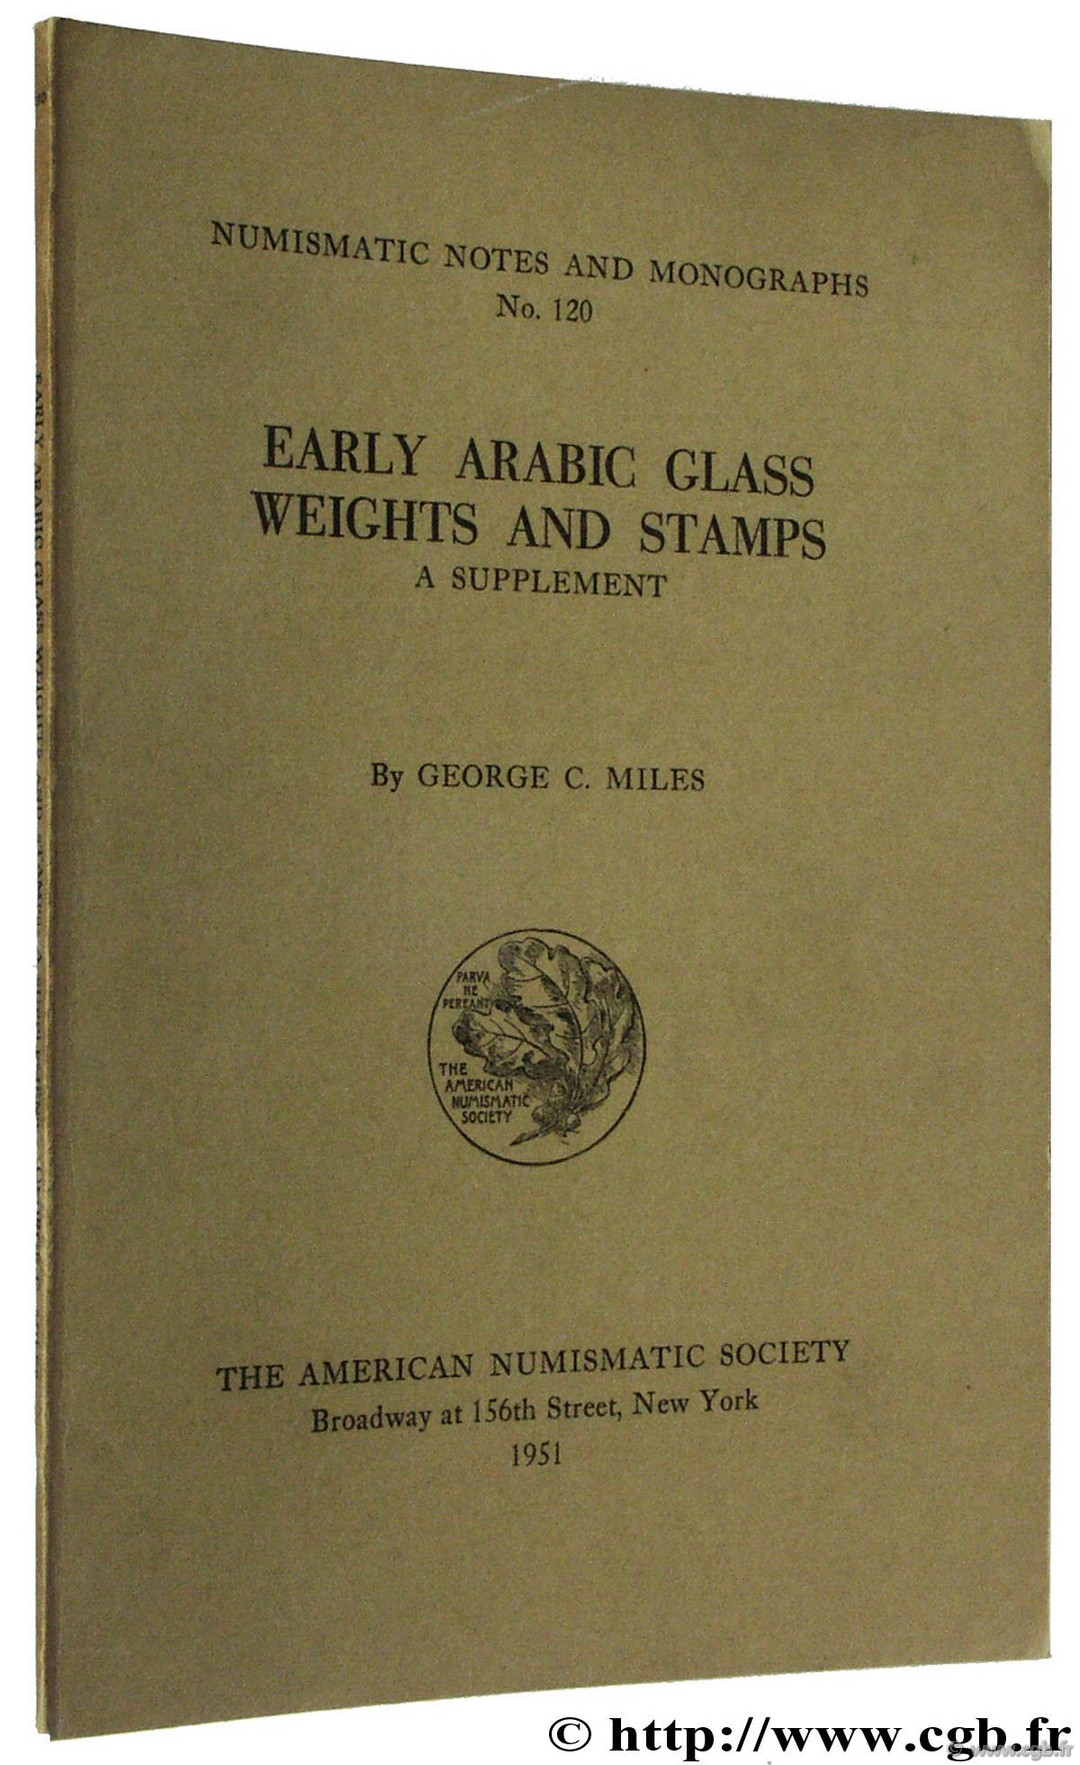 Early Arabic Glass Weights and Stamps, A supplement, NNM, n° 120 MILES G.-C.